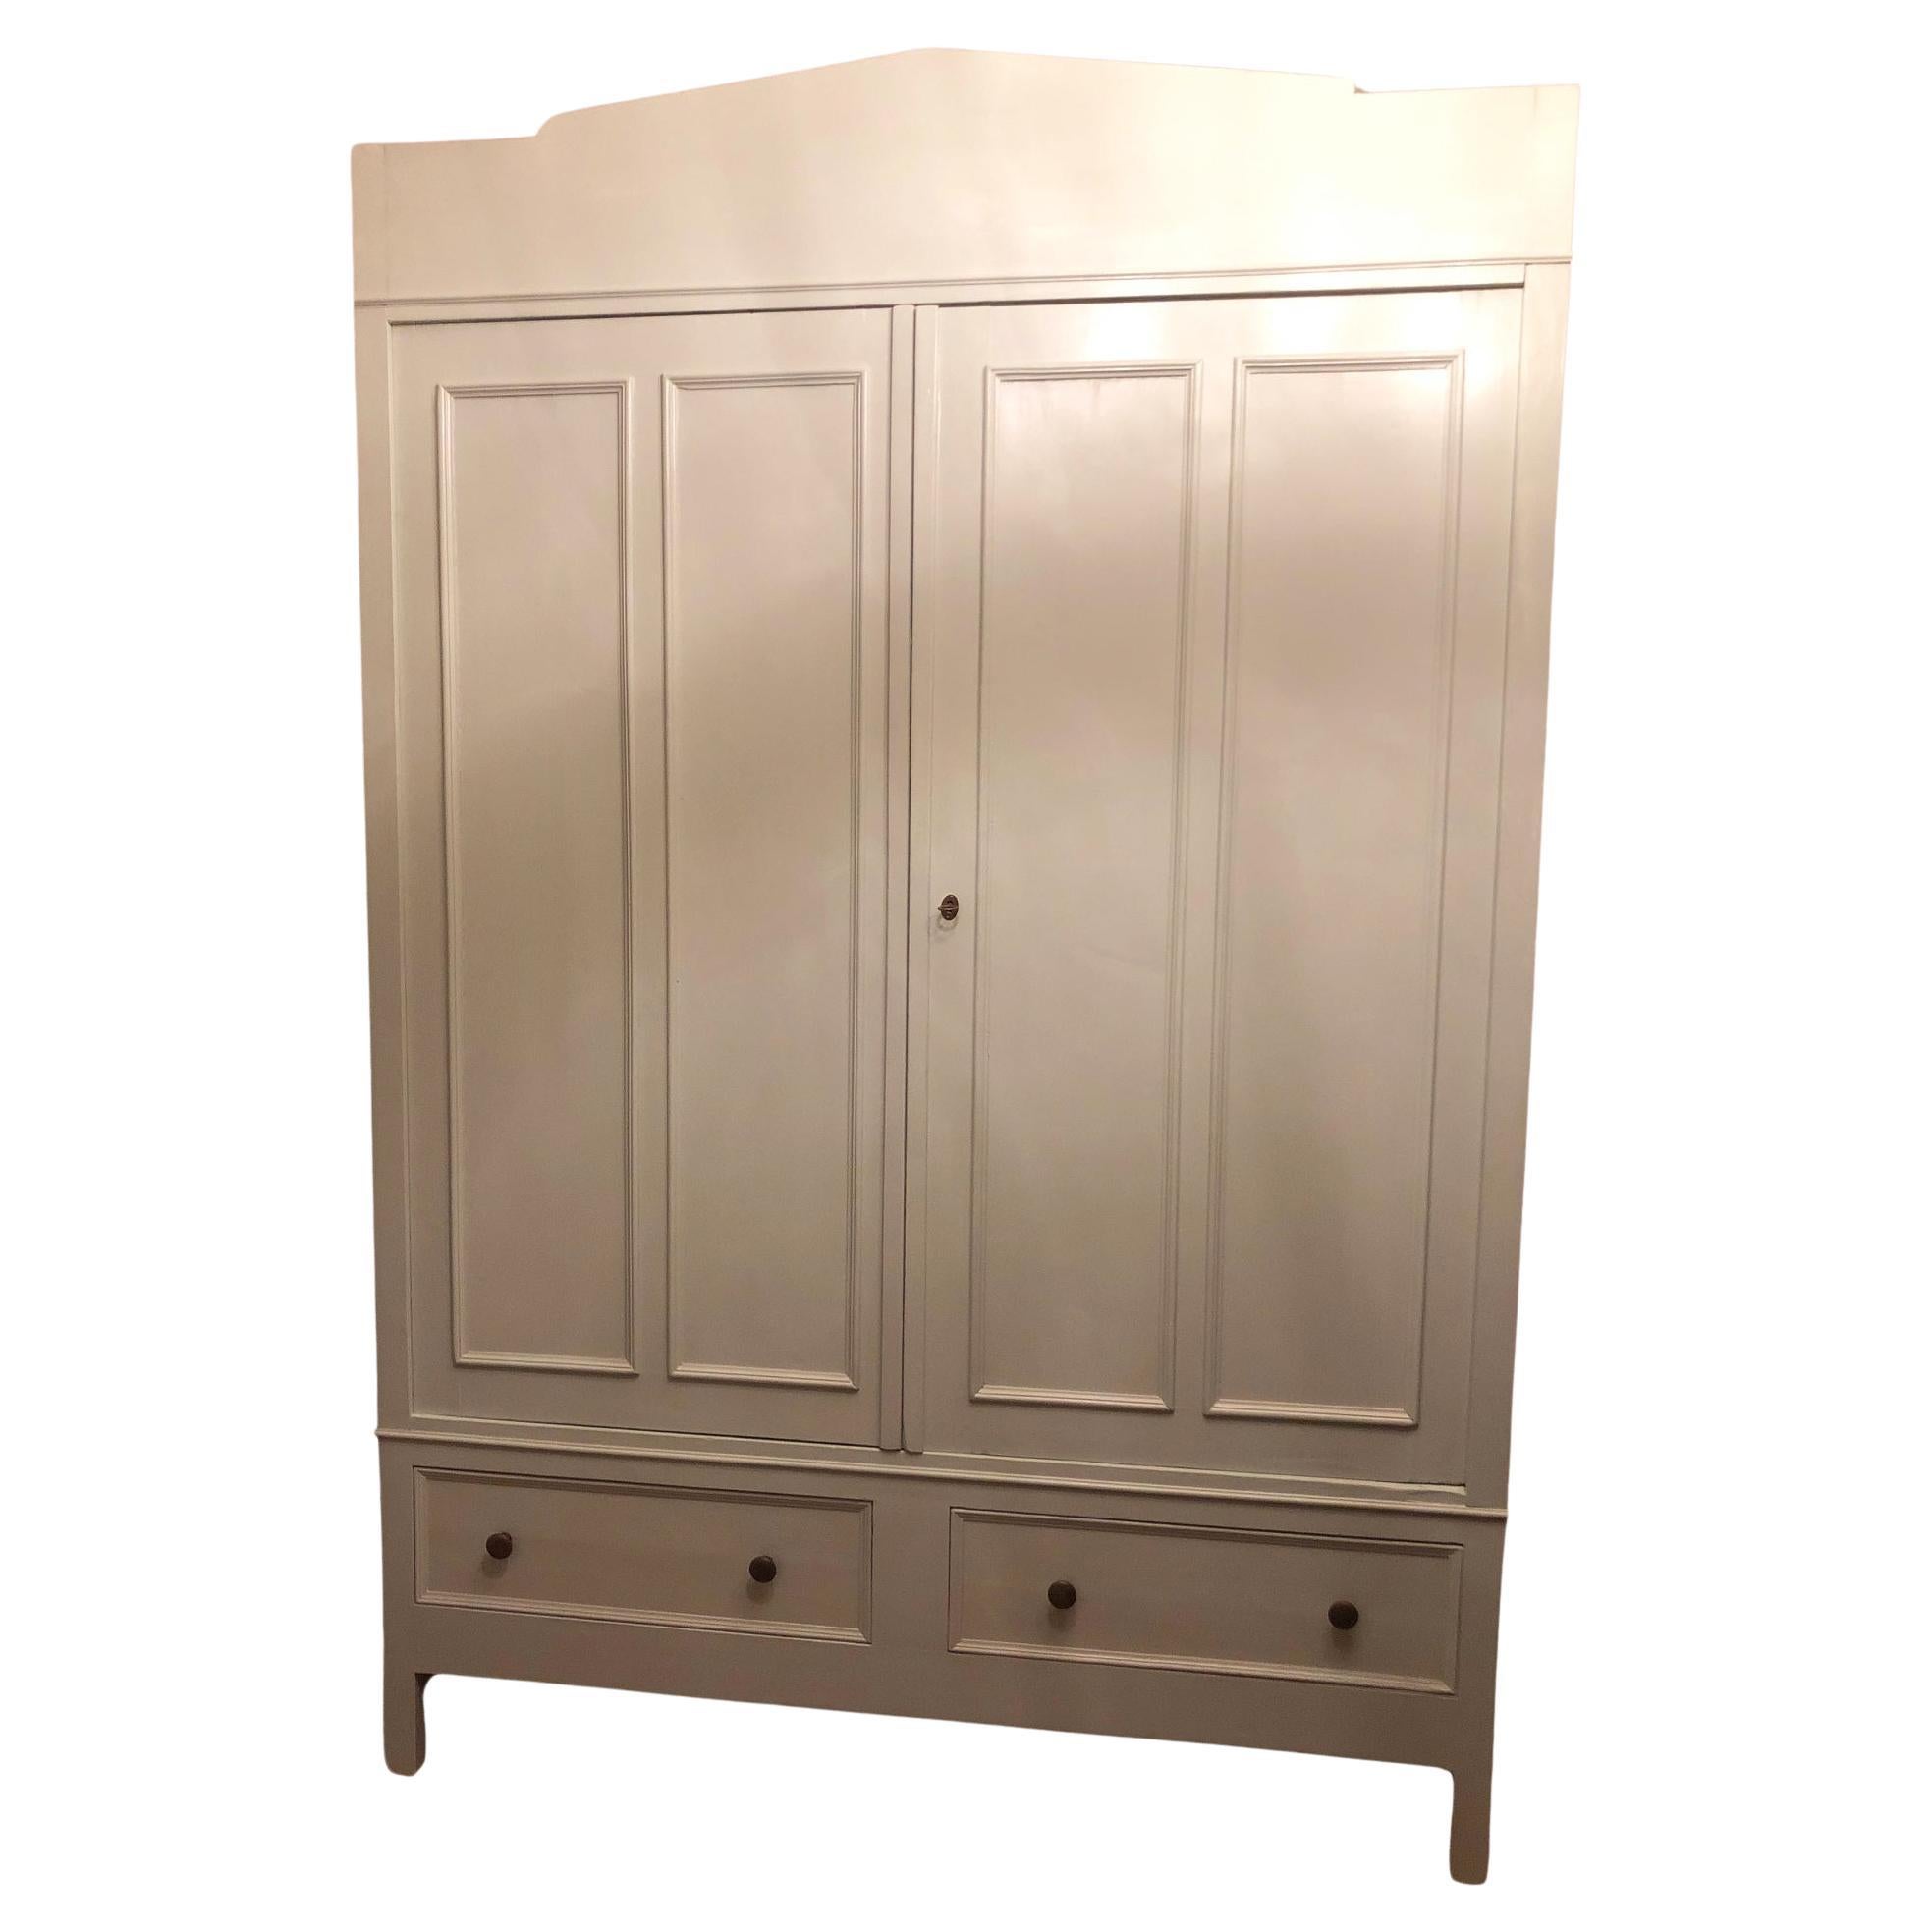 20th Century Tuscan light green two-door wardrobe with drawers